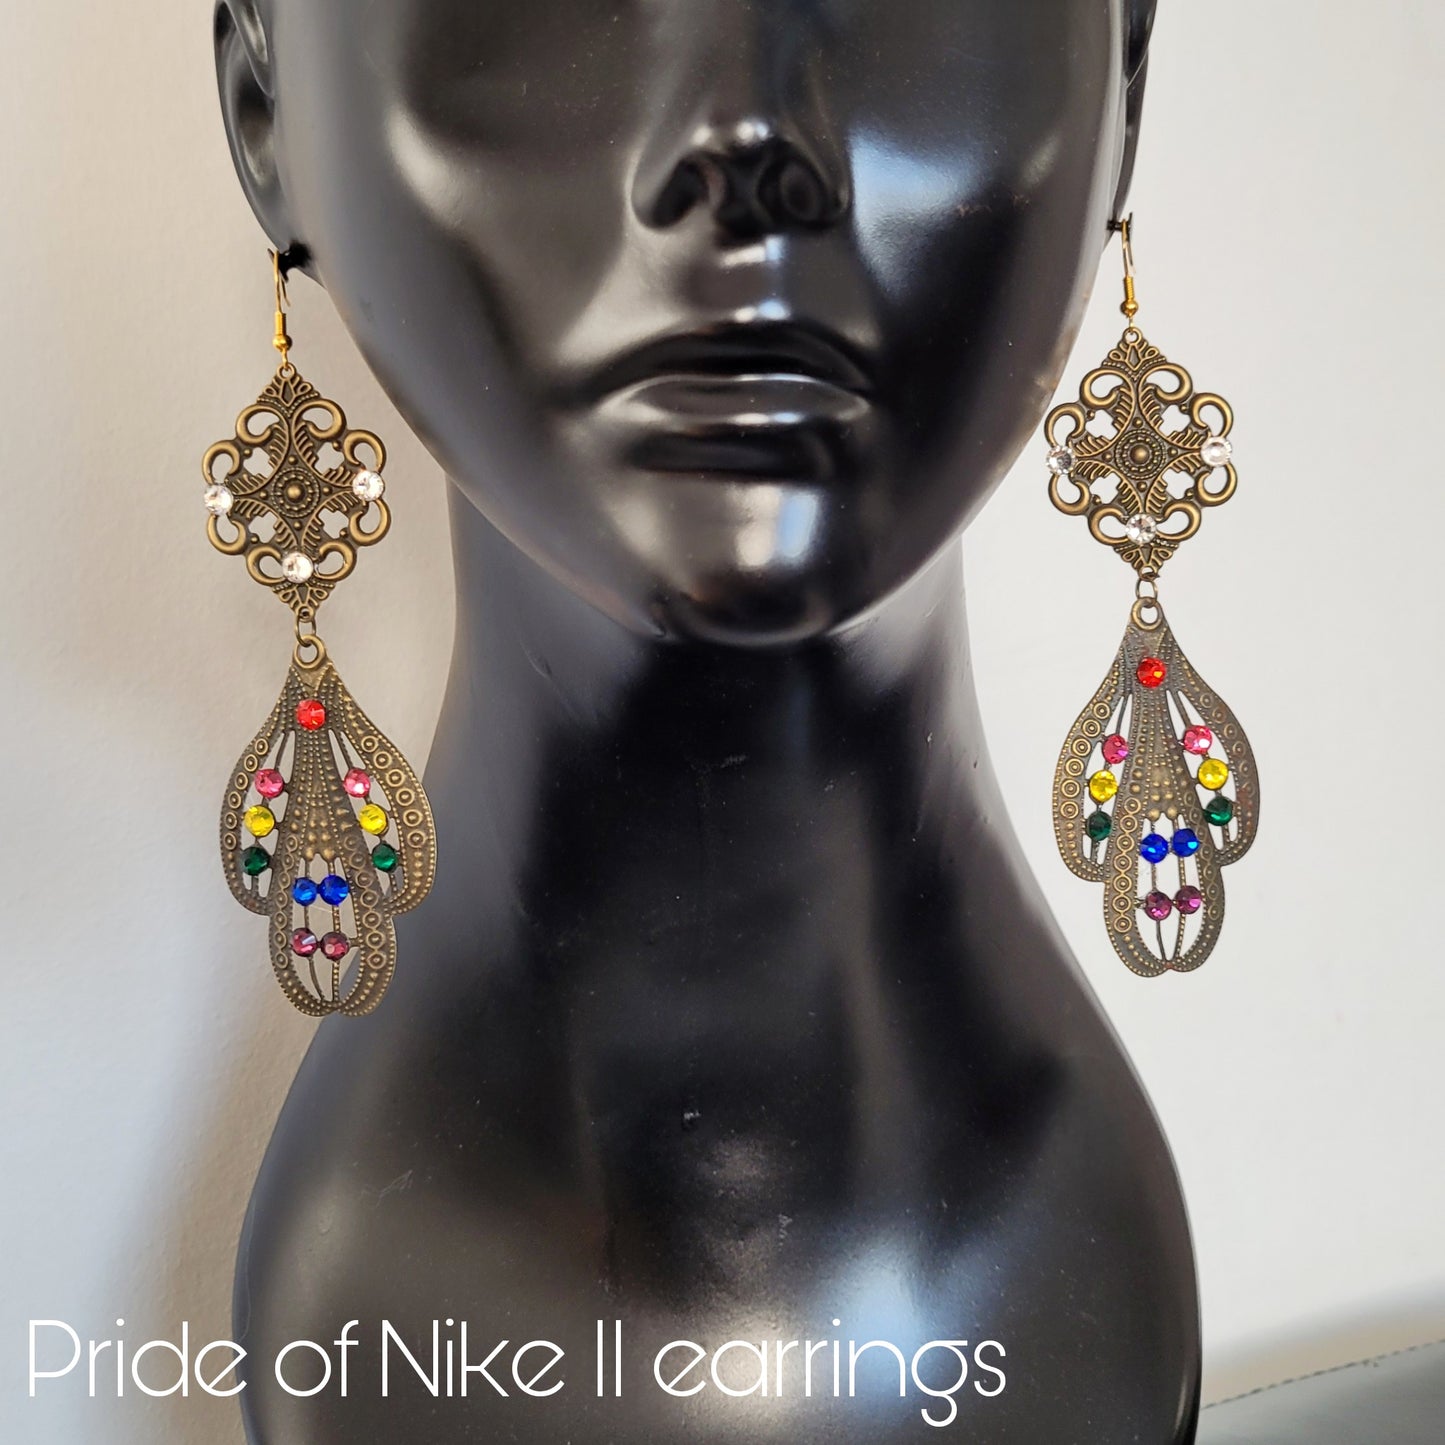 Deusa ex Machina collection: The Pride of Nike earrings